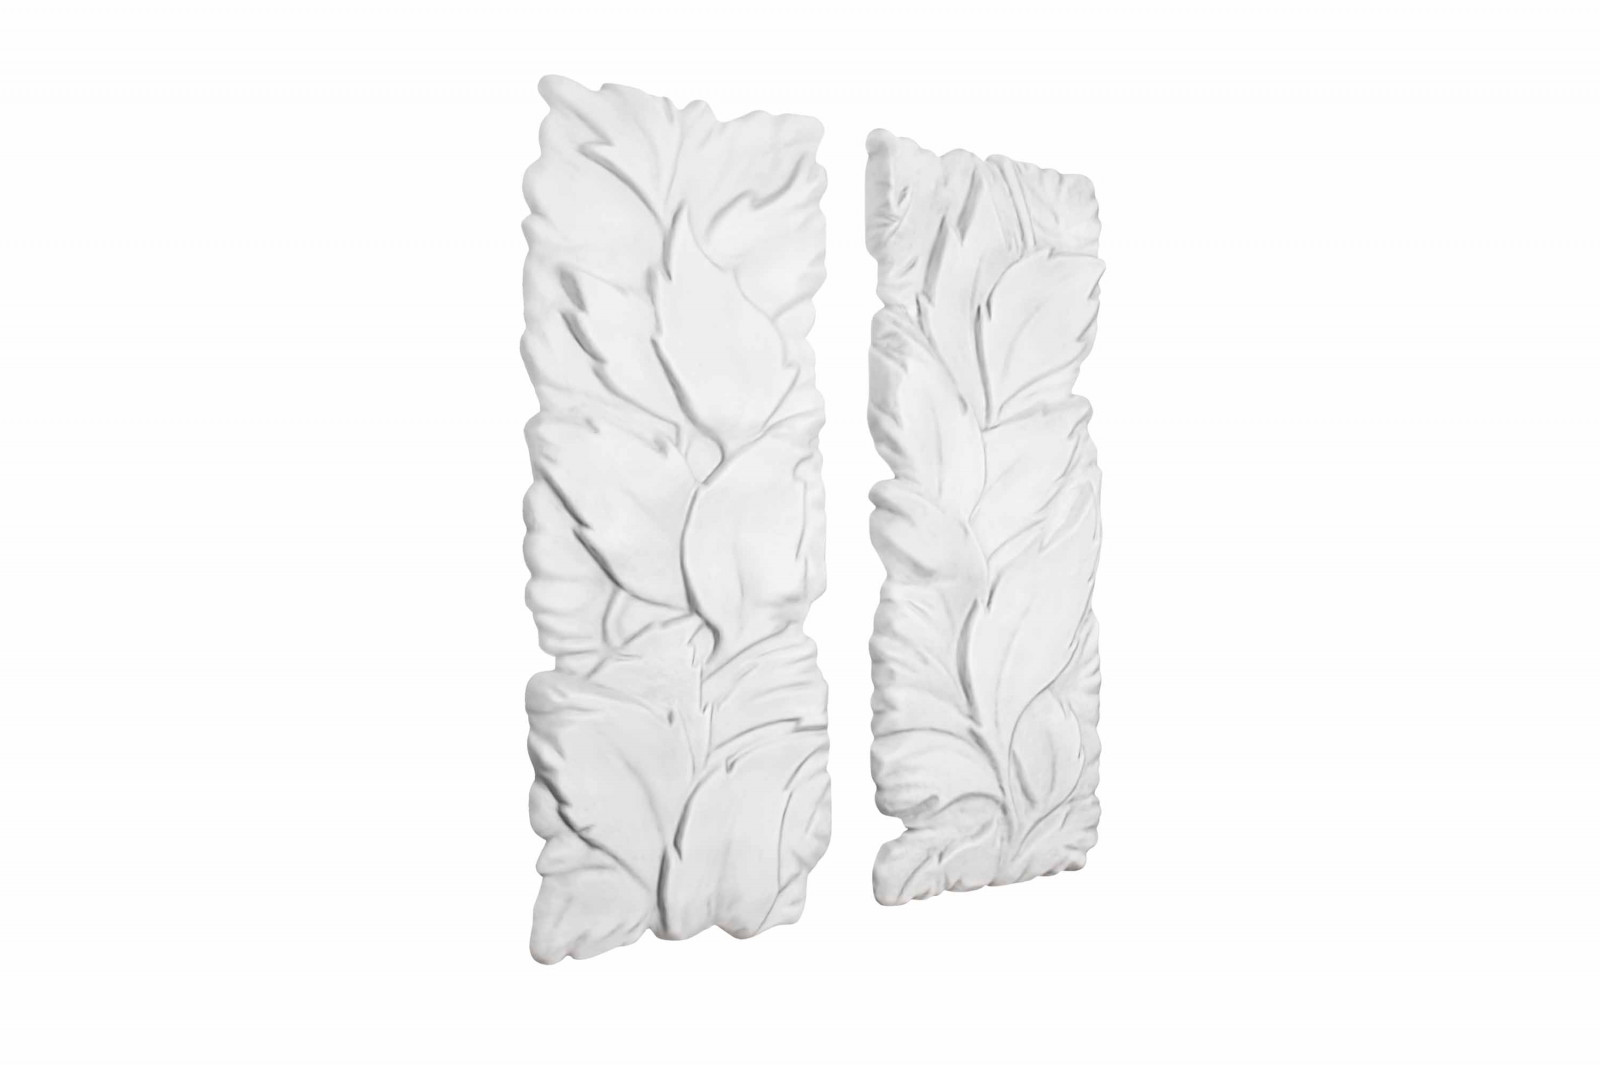 wall_panel_leaf_nature_exclusive_sculptural_luxurious_white_helix_karpa_21-1607-1600-1400-100